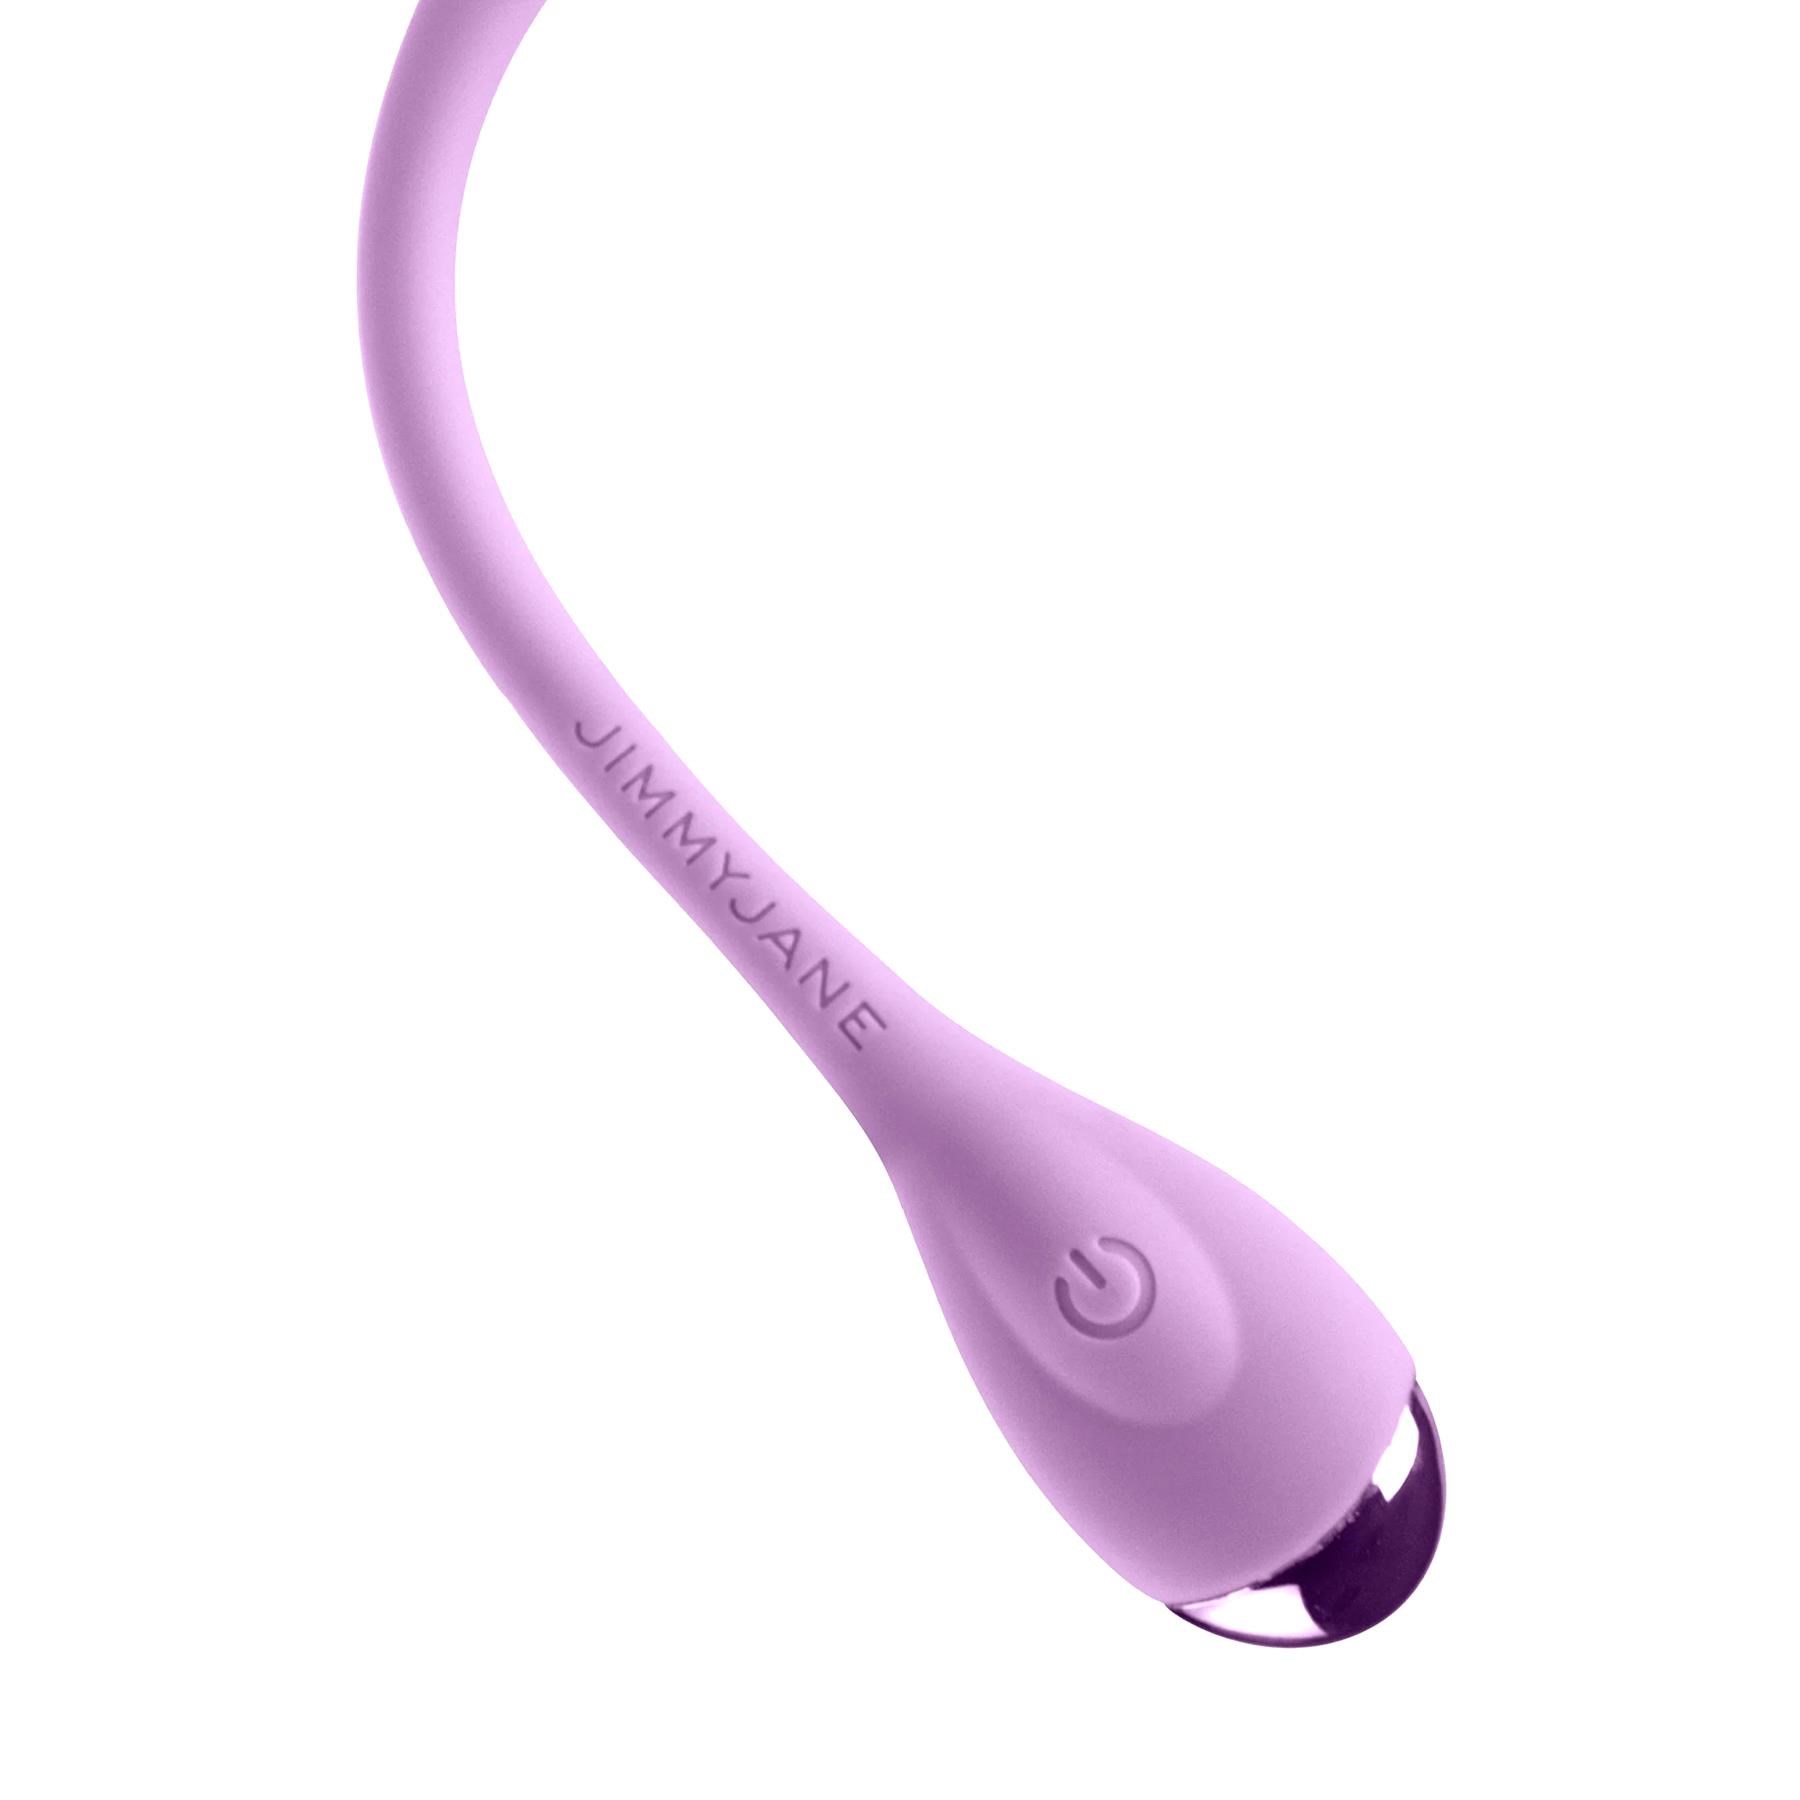 Jimmy Jane Form 2 Kegel Trainer With Remote Control - Close Up on Controller